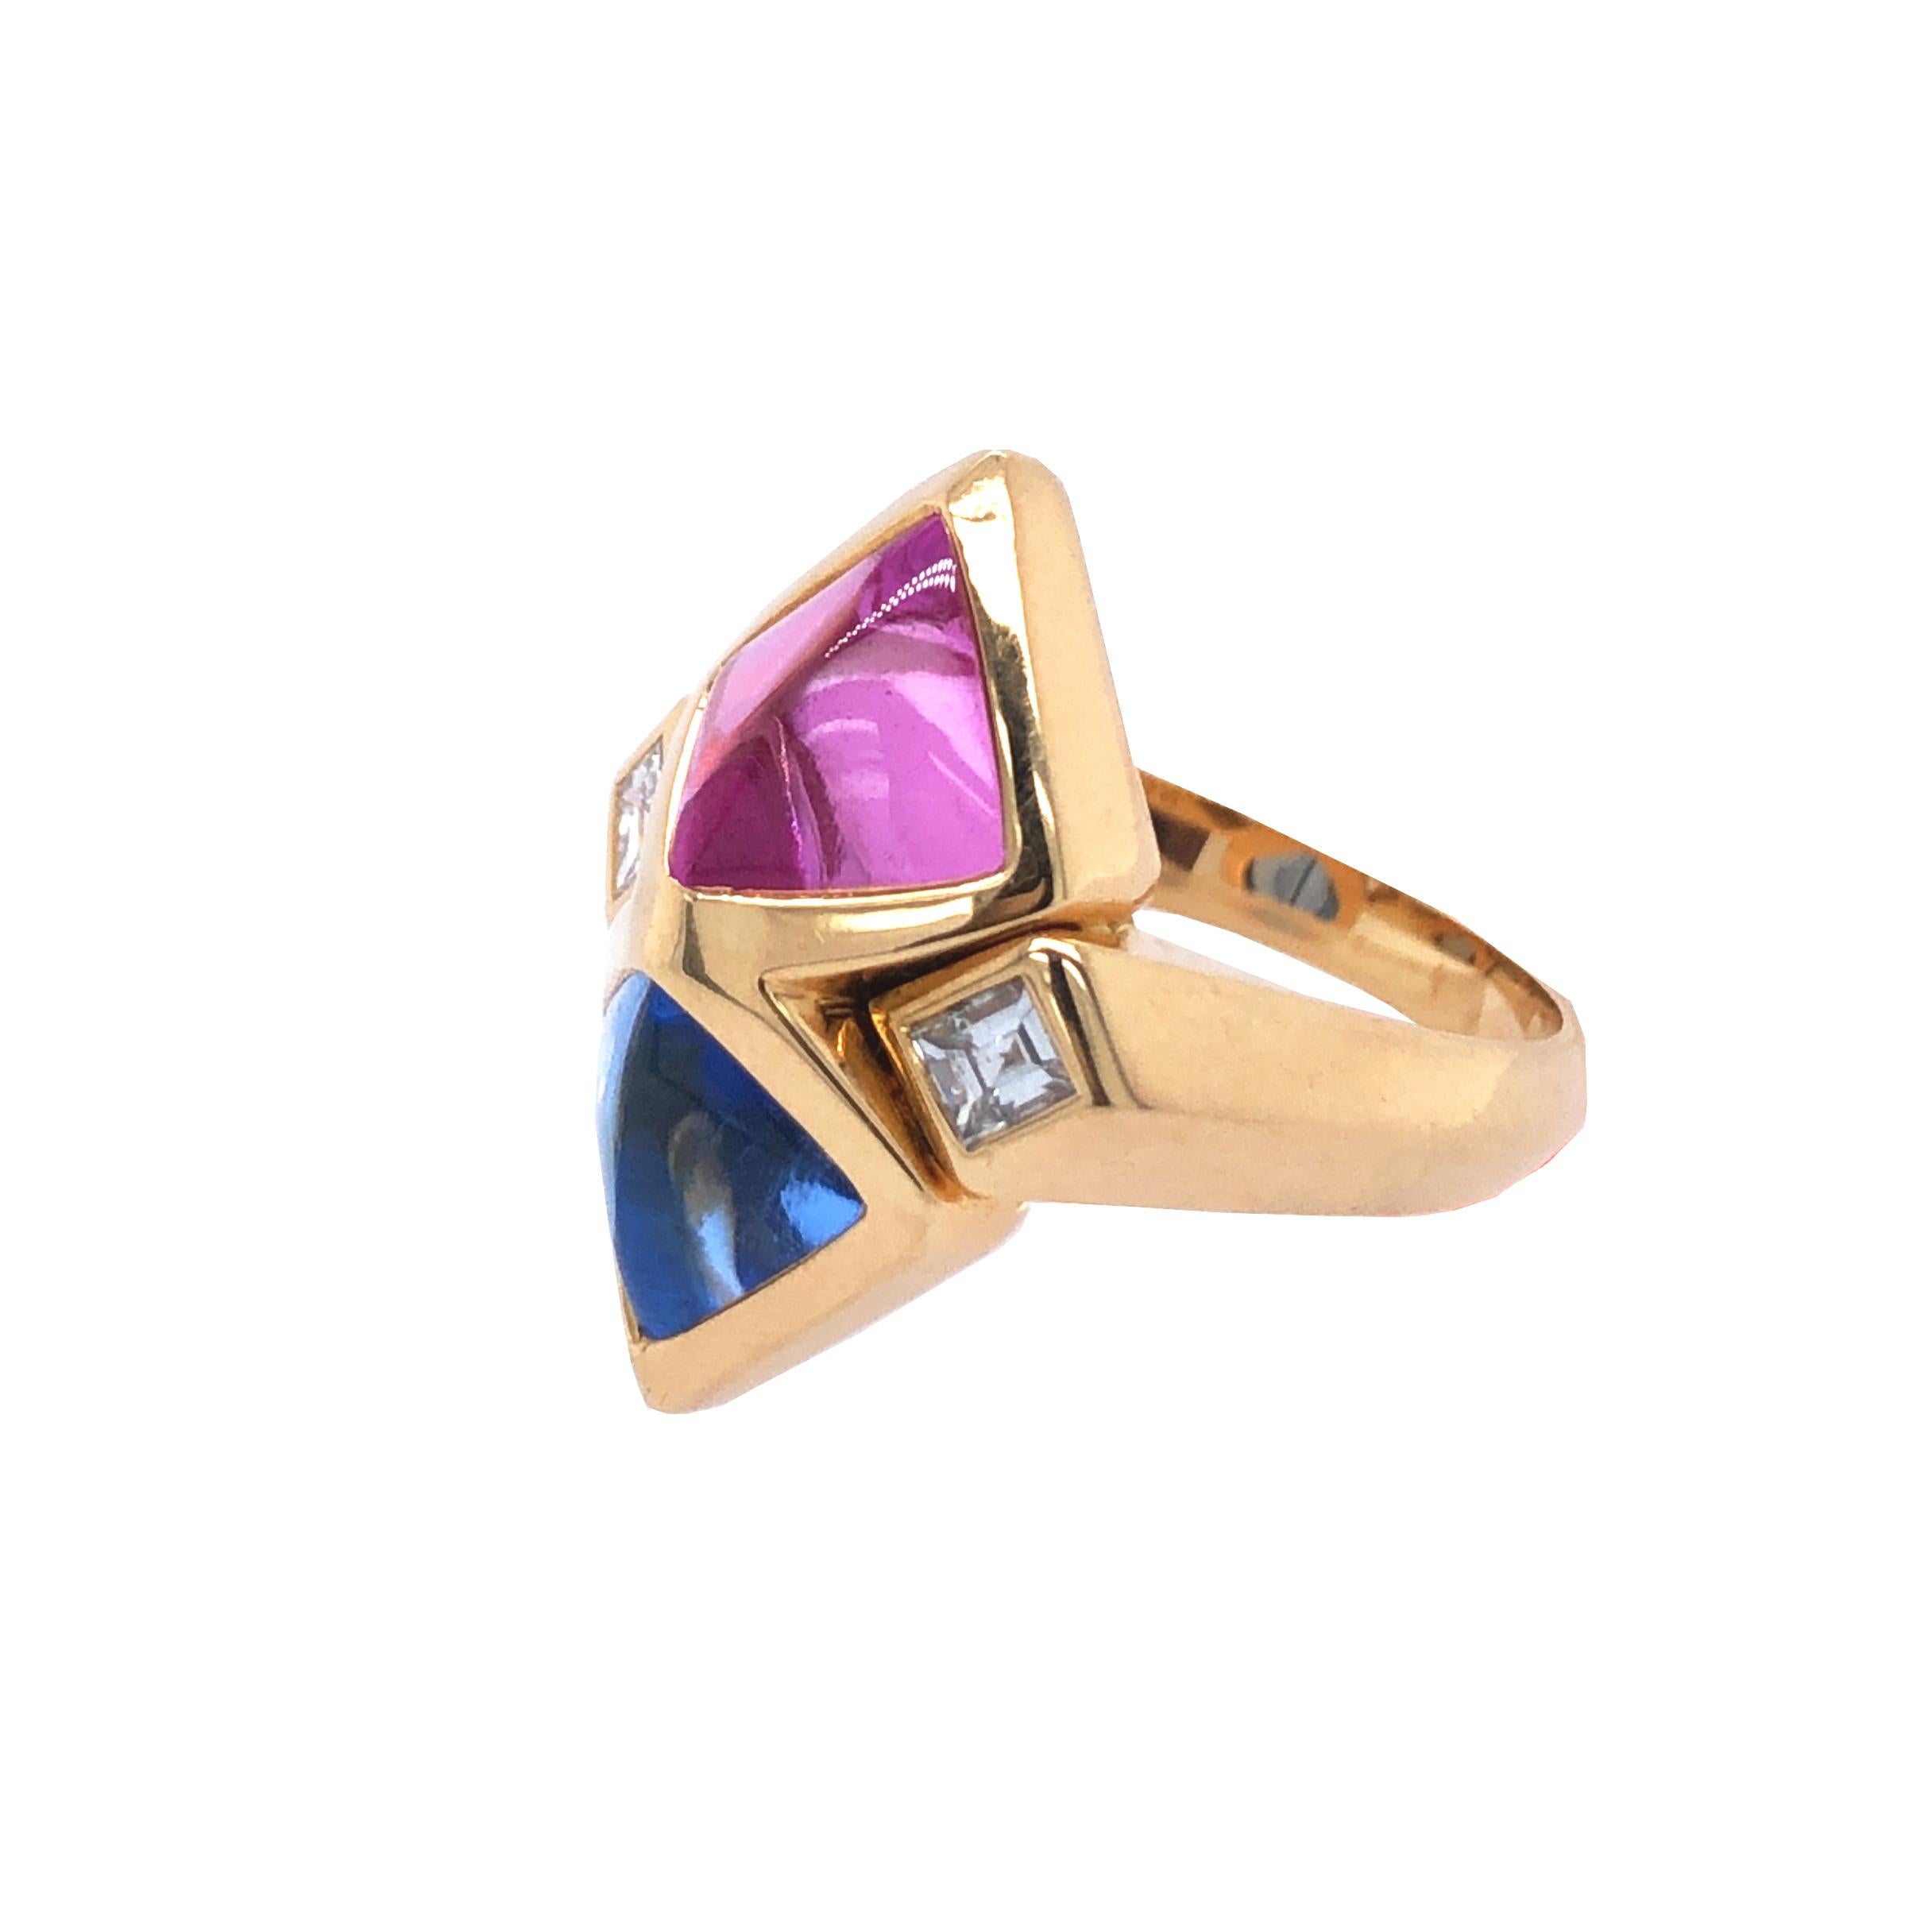 The geometric ring set with triangular cabochon blue and pink quartz, with square-cut diamonds
18k yellow gold
Signed Marina B, numbered
Ring size 5 ¾; Gross weight 8.3 g 5.3 dwts